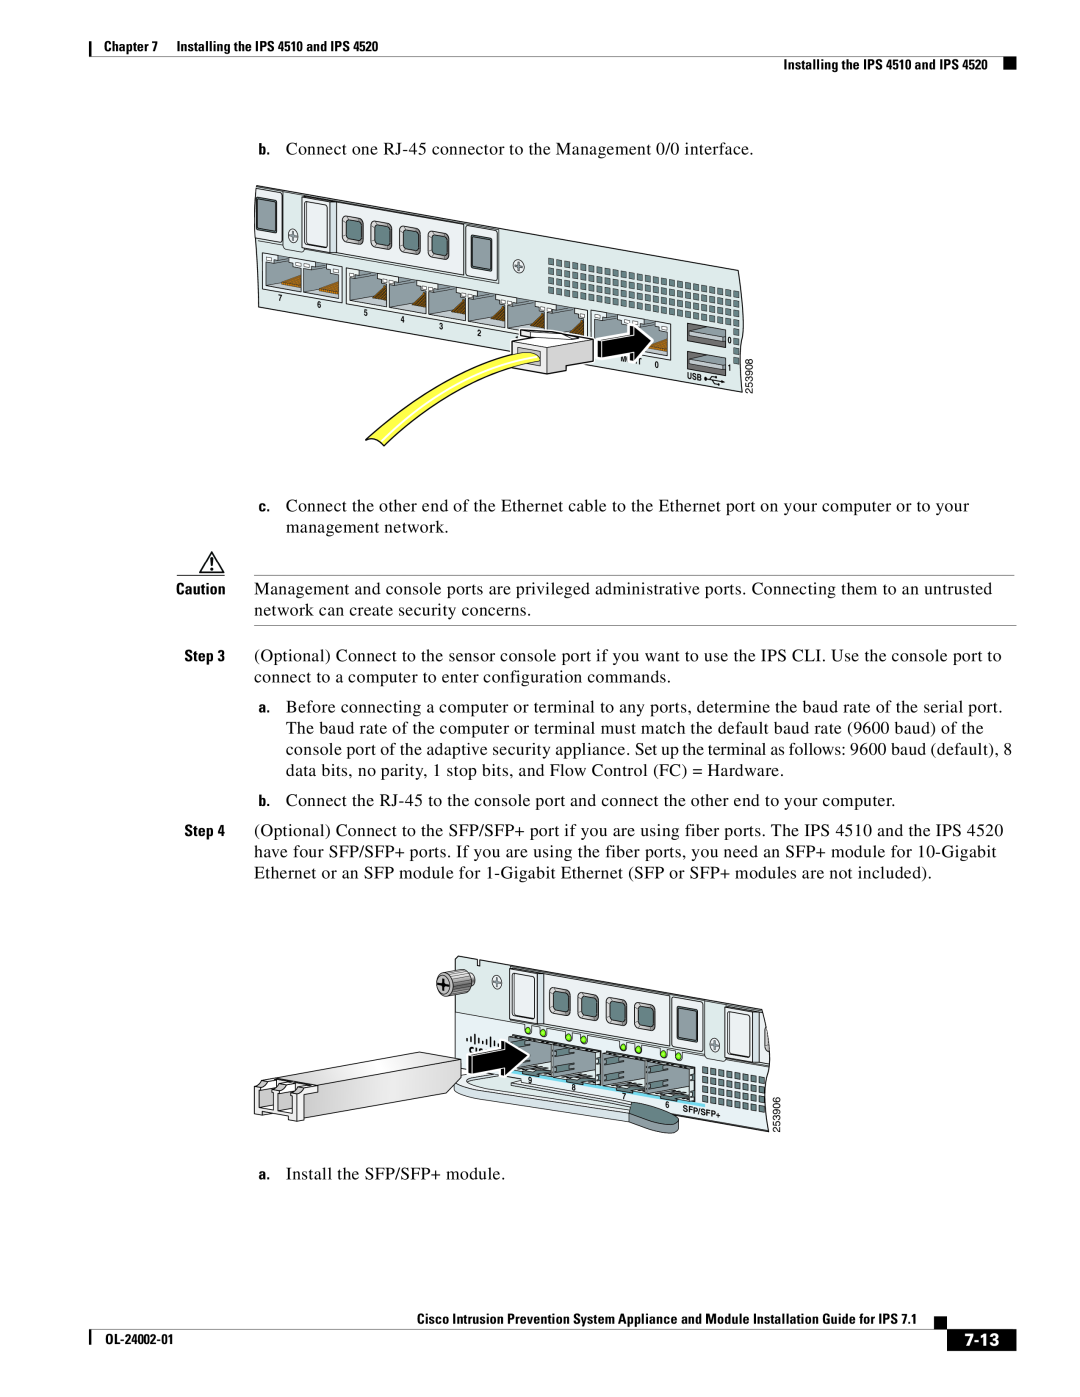 Cisco Systems IPS4520K9, IPS4510K9 specifications 7-13, a.Install the SFP/SFP+ module 